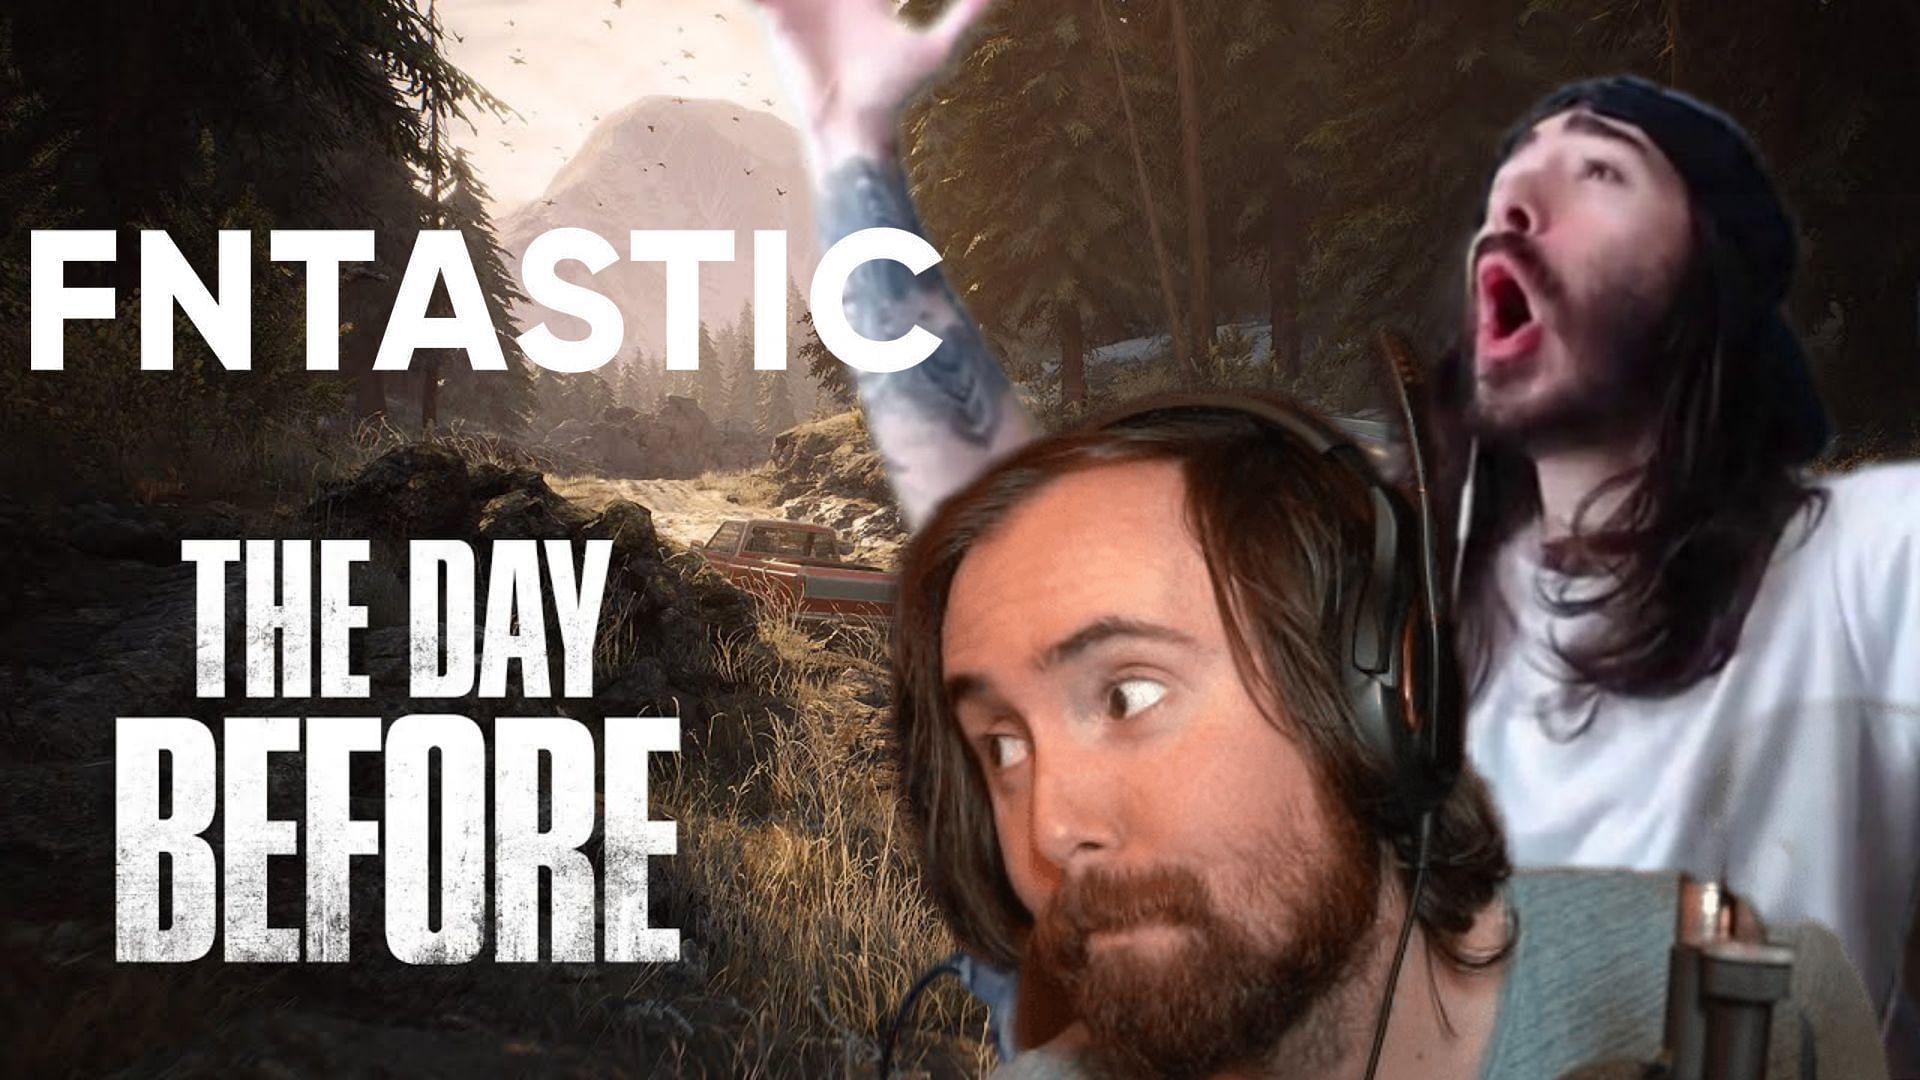 The Day Before' Creators, Fntastic Studio, Closes a Few Days After